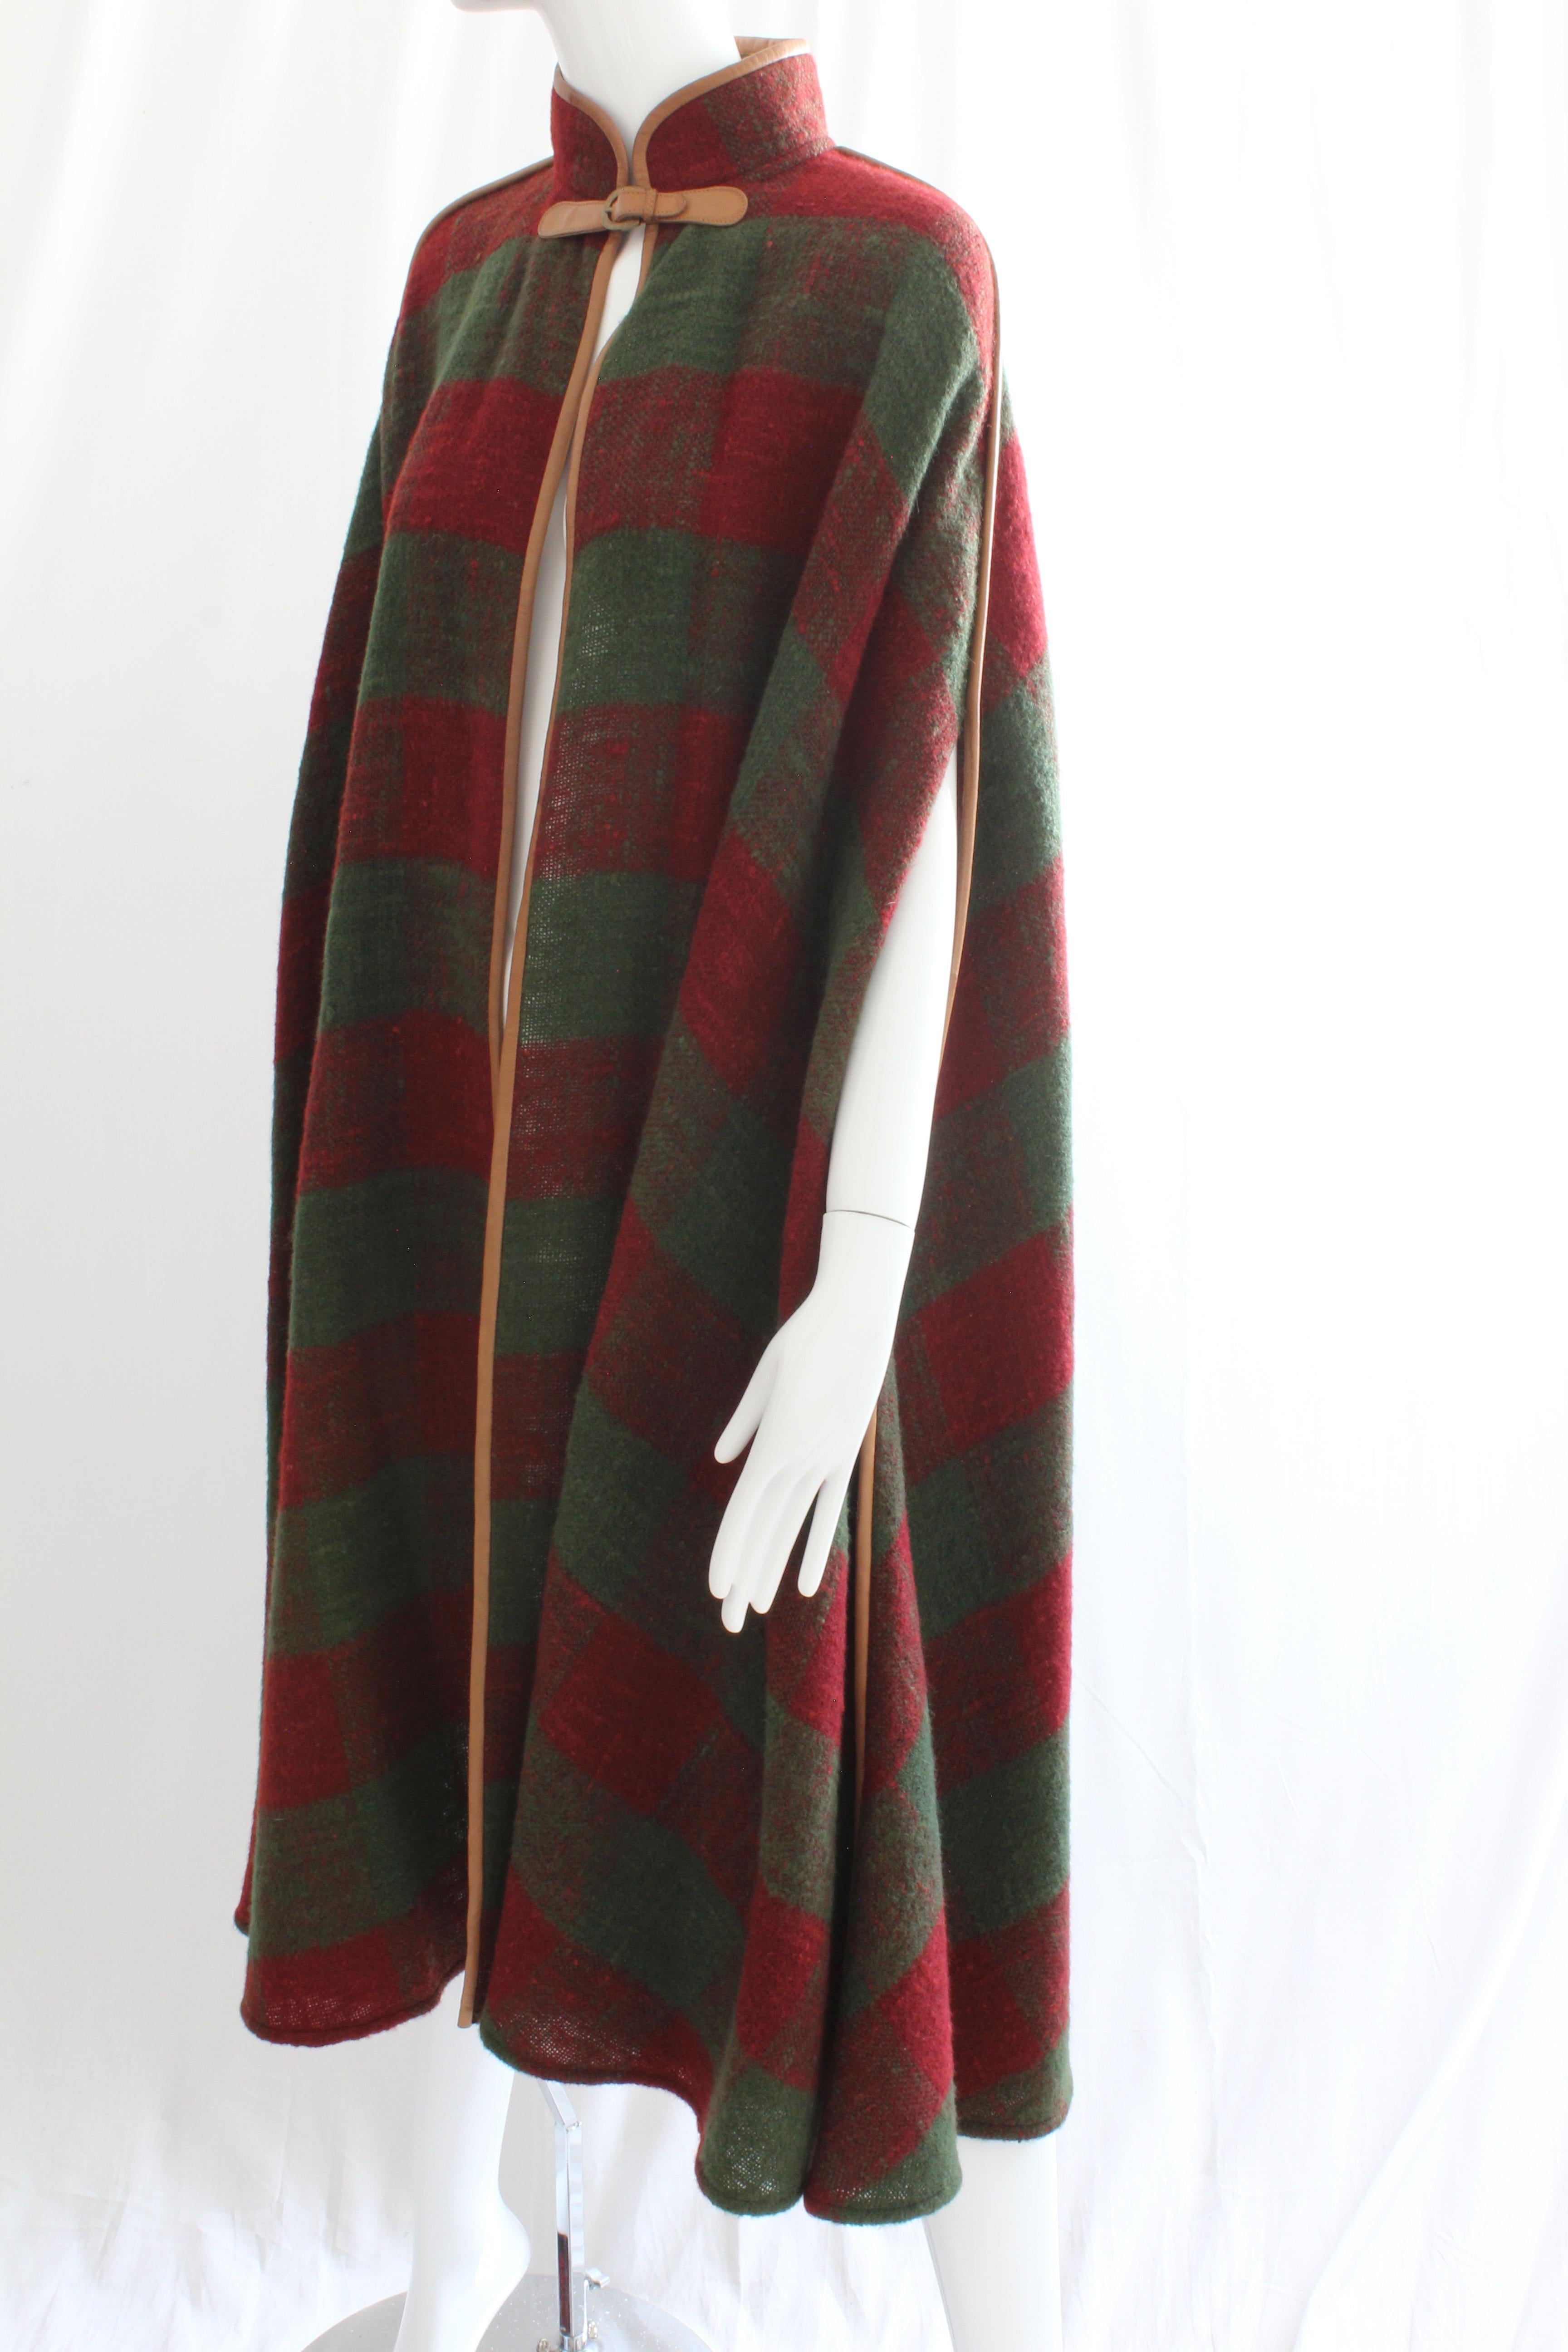 Women's Rare Gucci Wool Cape Leather Trim Striped Web with Equestrian Motif Buckle 42